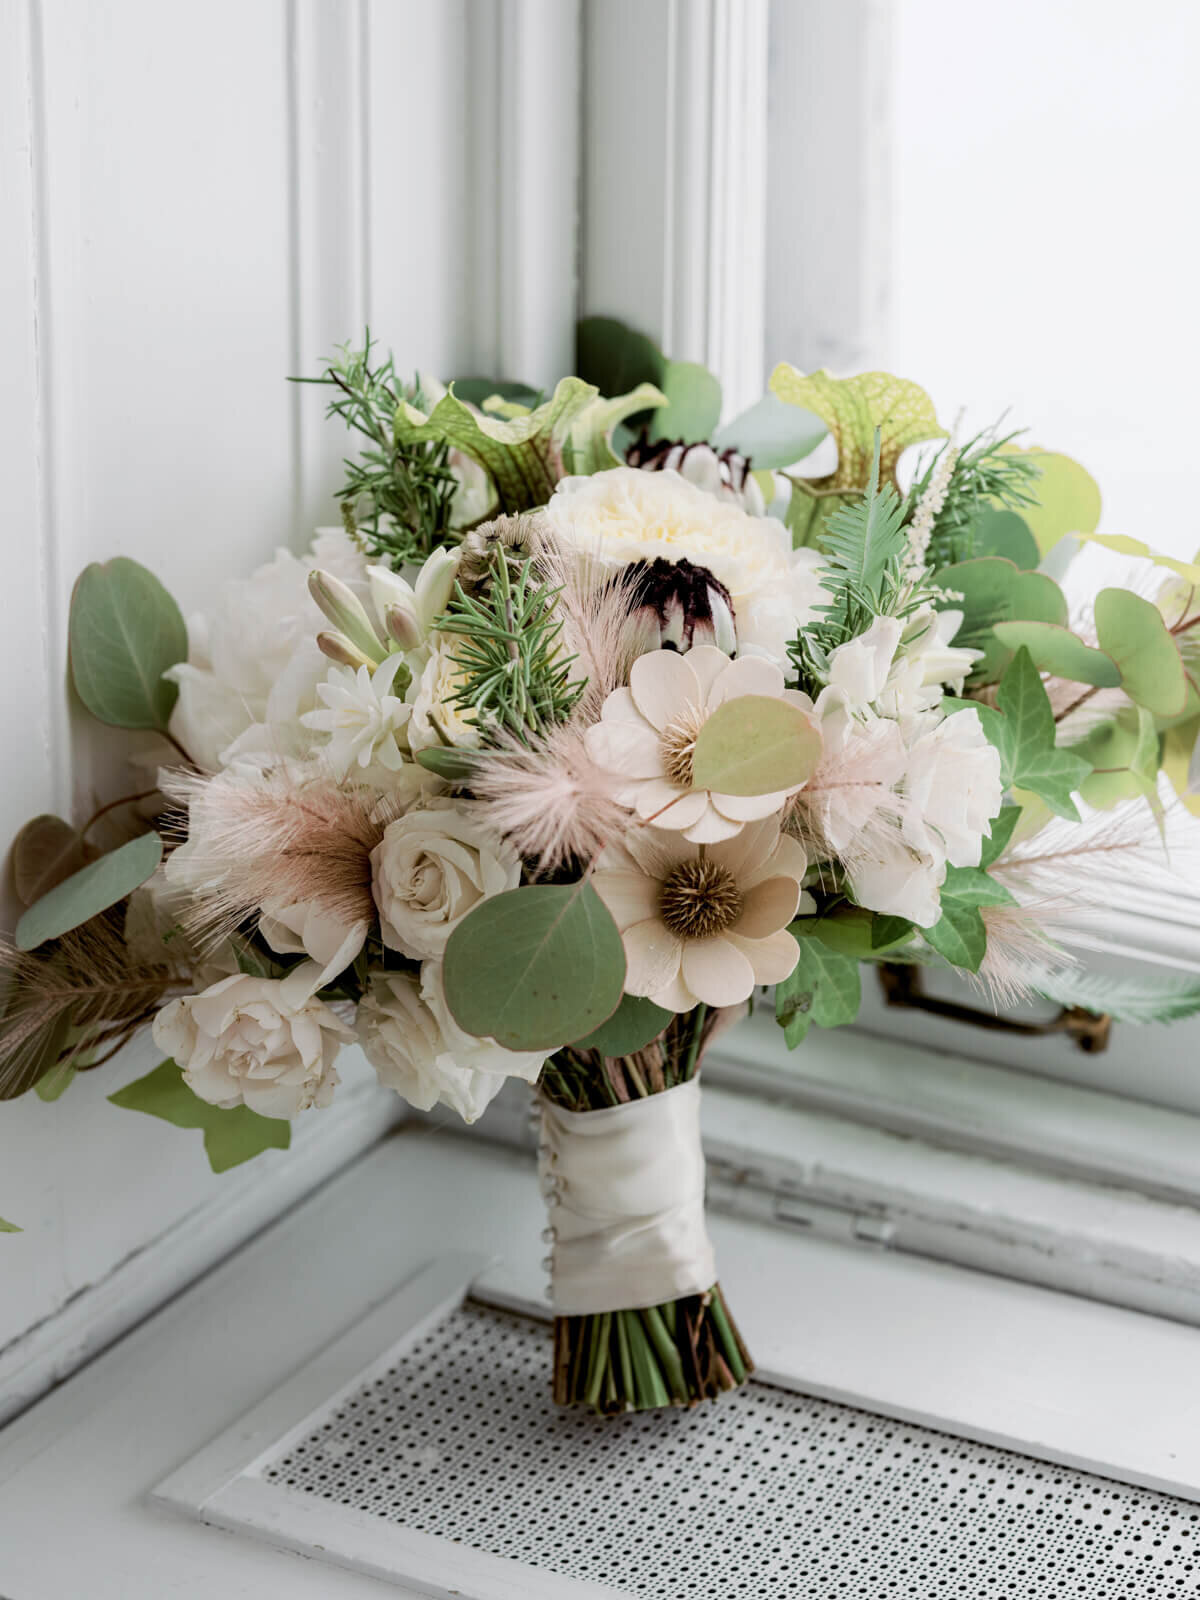 A bouquet of light pink flowers and green leaves